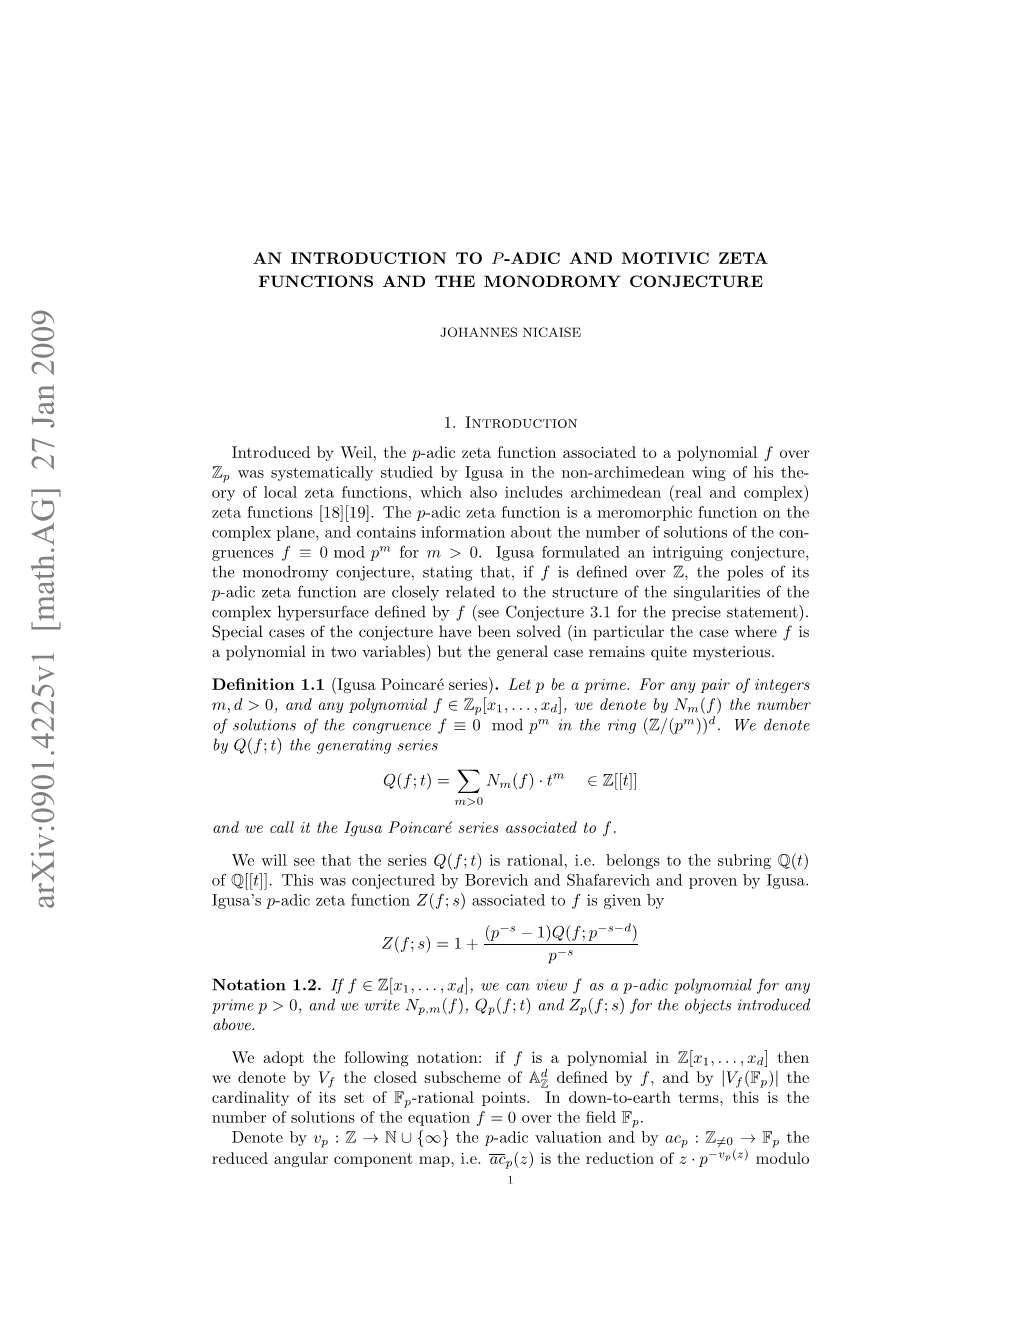 An Introduction to $ P $-Adic and Motivic Zeta Functions and The